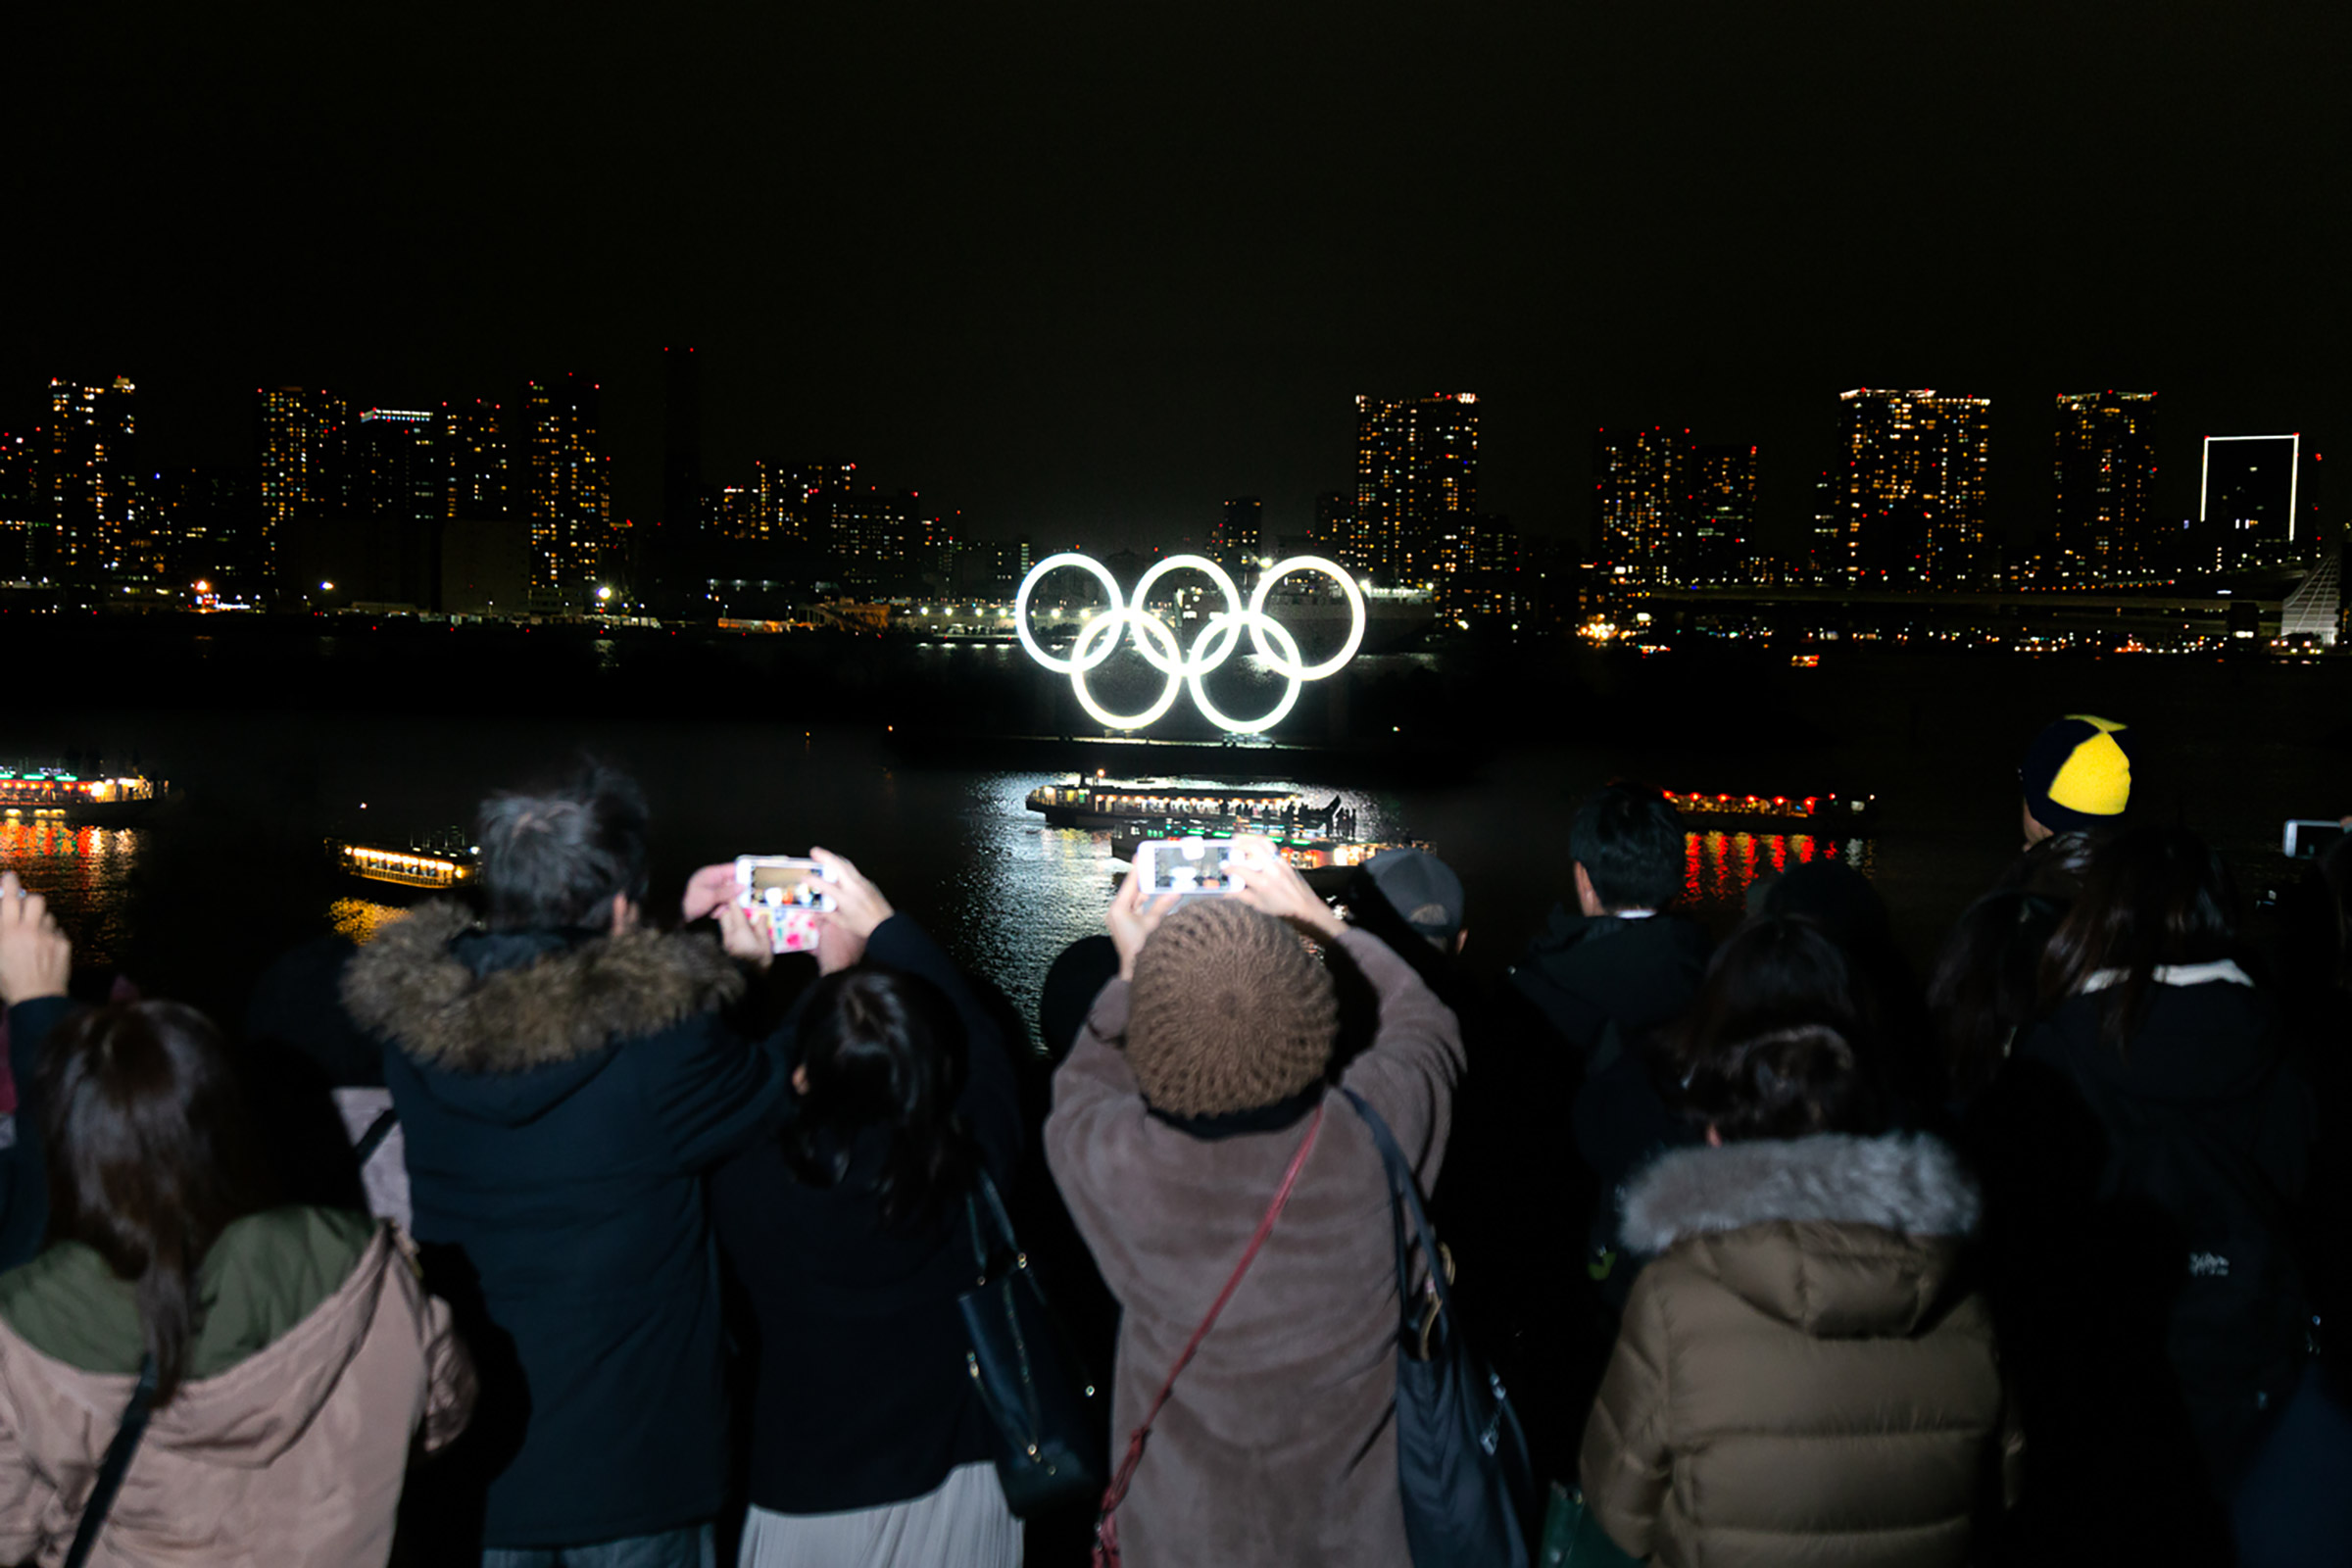 The Olympic logo floats in Tokyo Bay in December 2019, before the pandemic struck (Kenji Chiga for TIME)